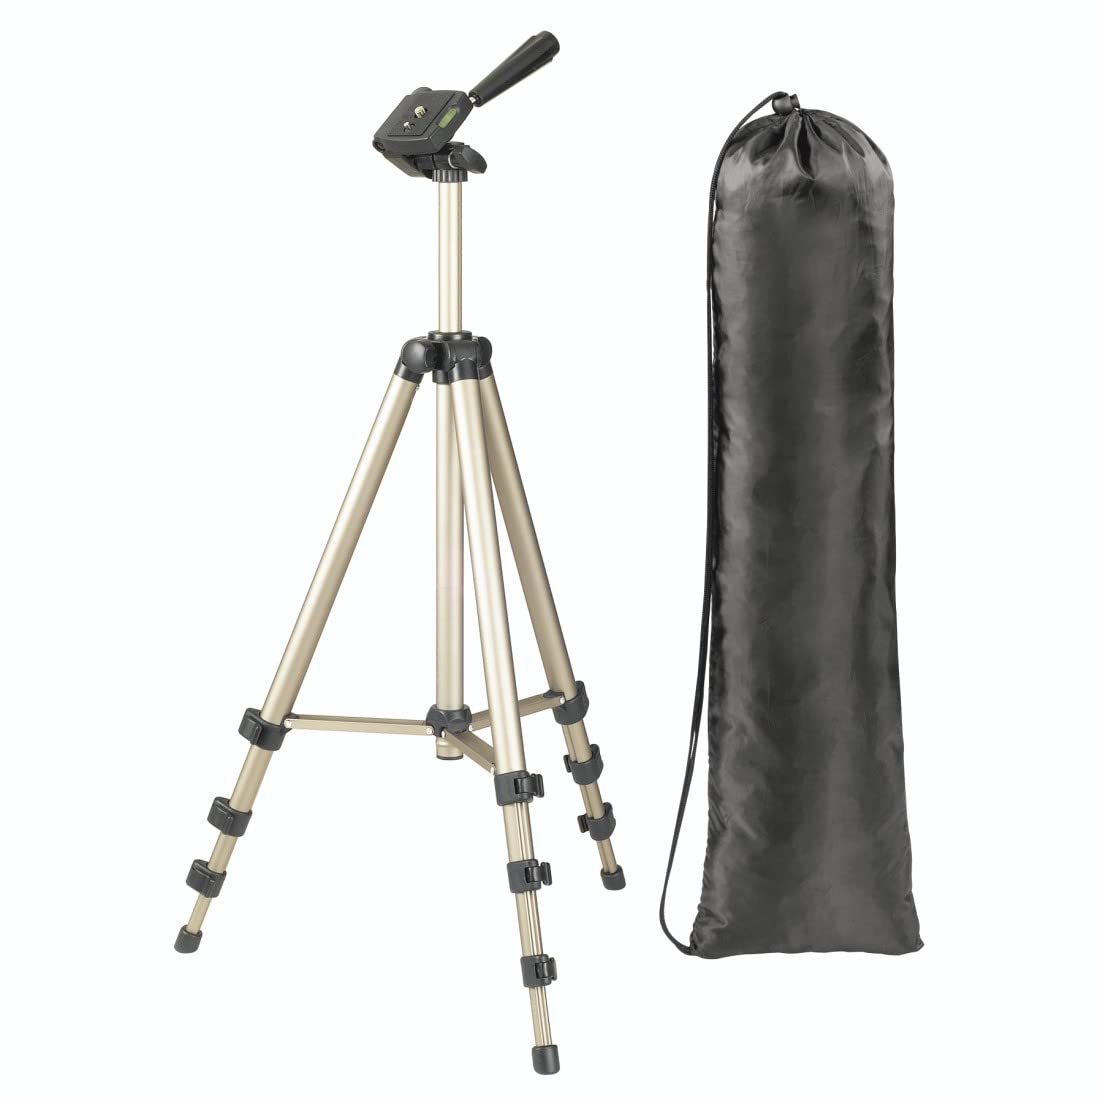 Hama Camera Tripod Star 700 EF (light tripod with 3-way head, photo tripod with 42.5-125cm height, tripod incl. carrying case, camera tripod suitable for SLR and system cameras), Champagne